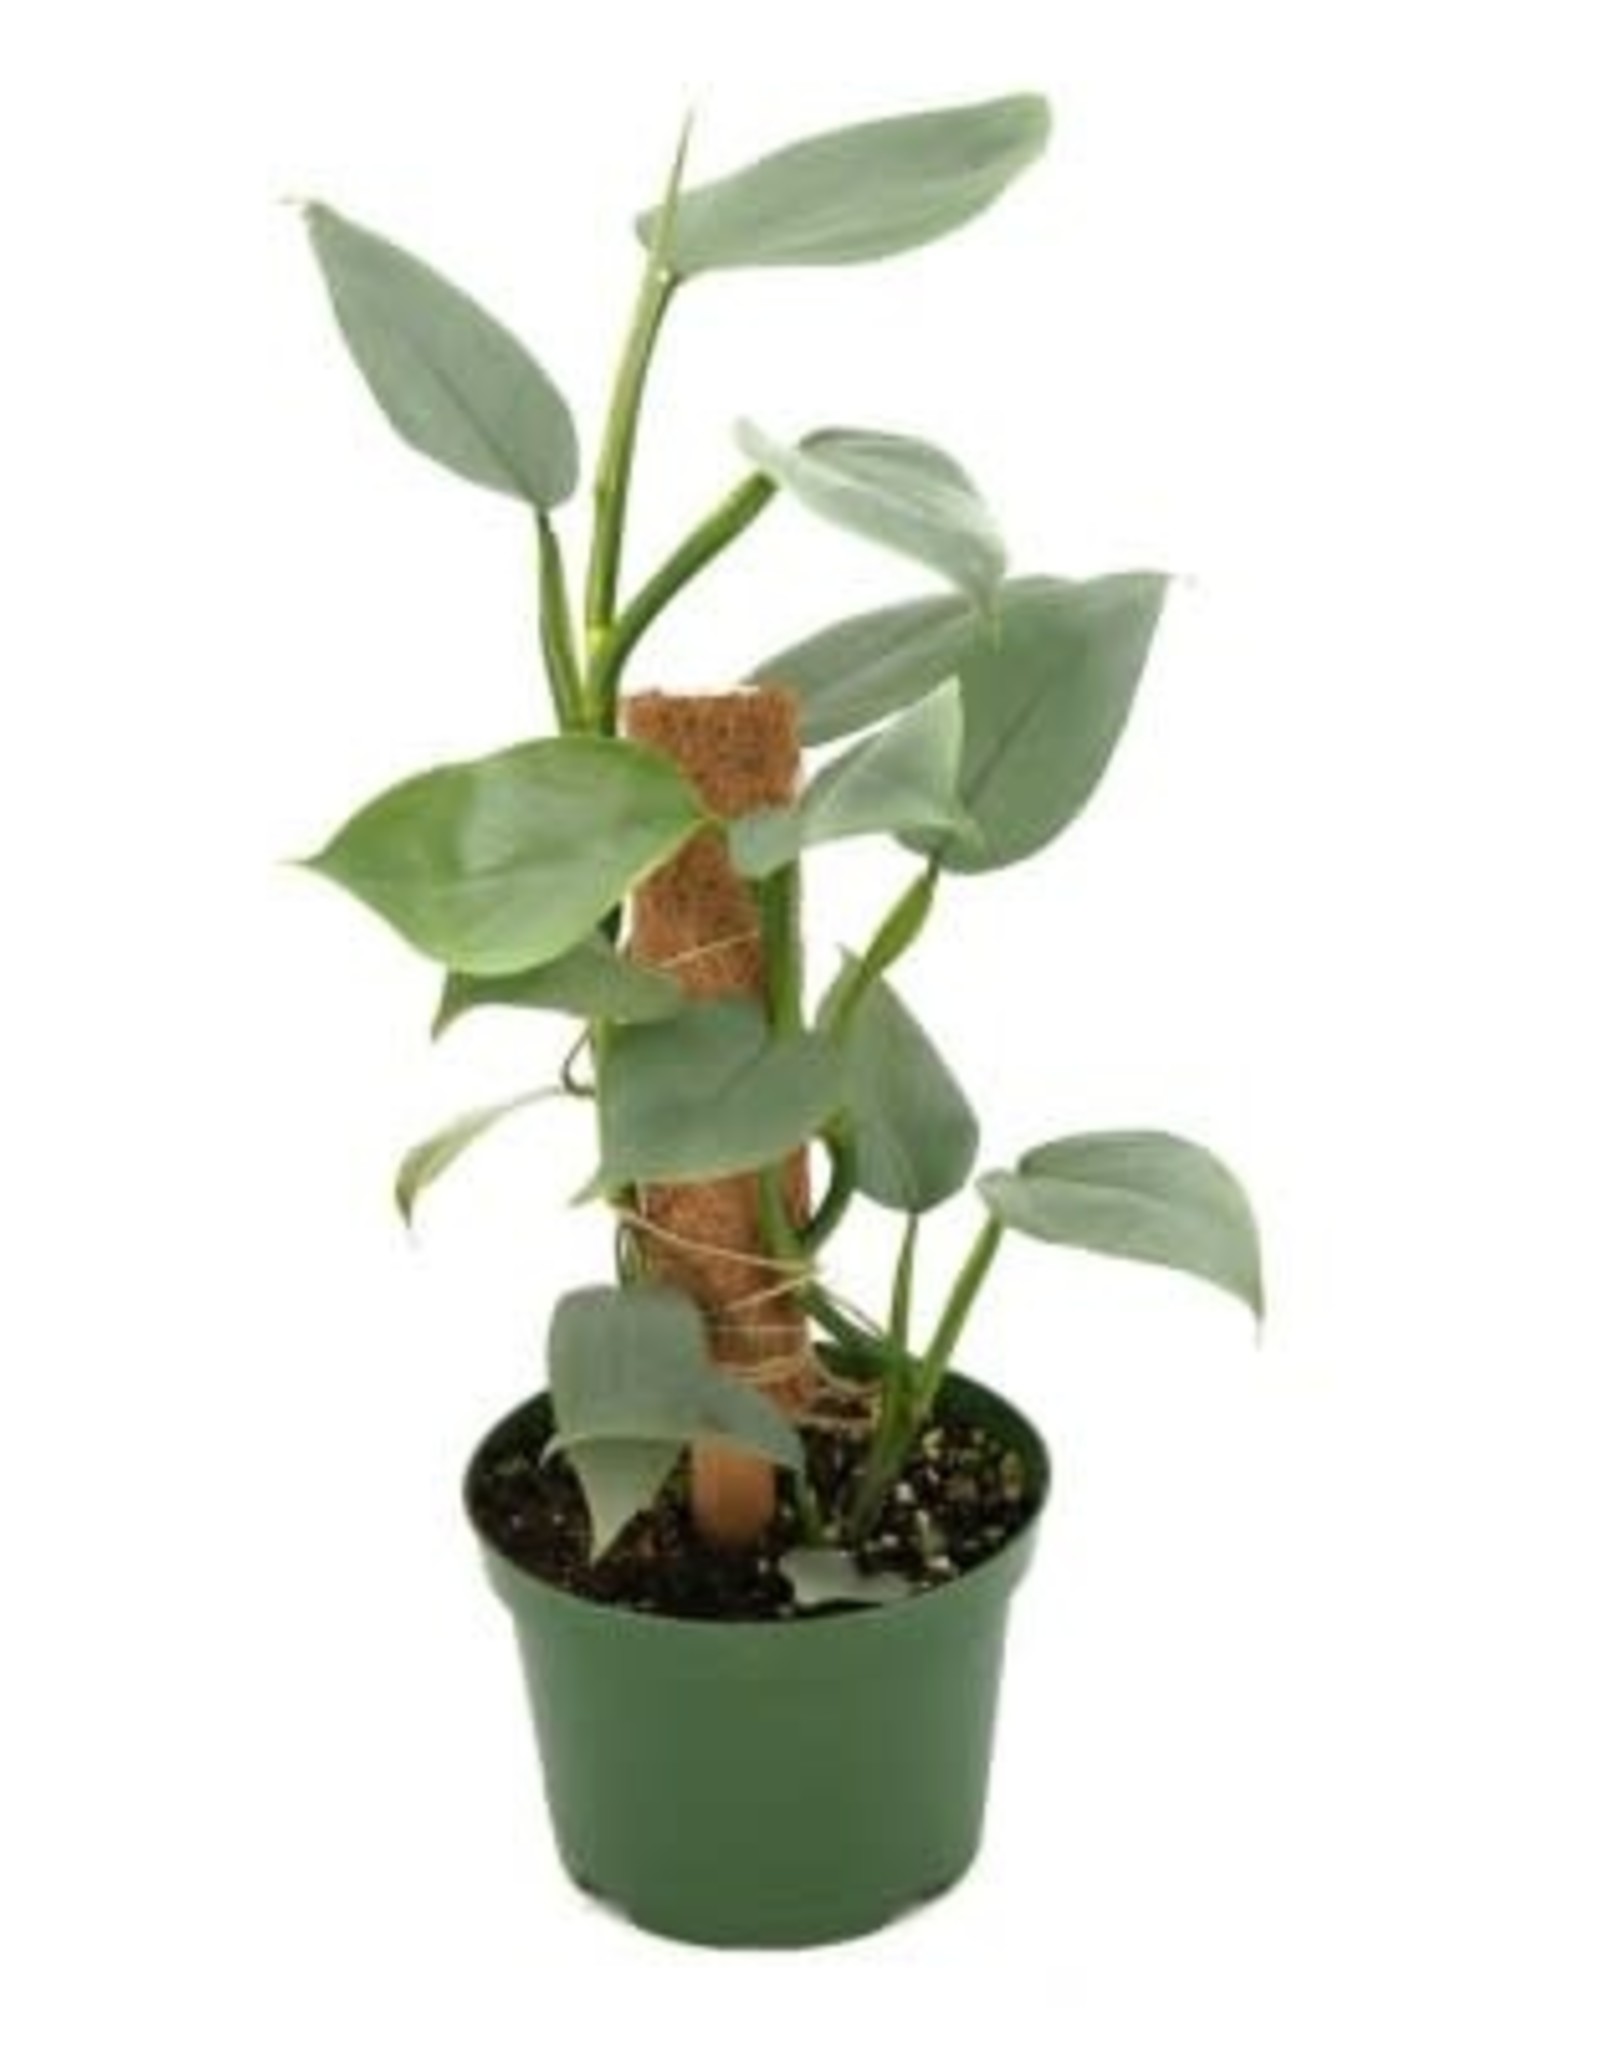 Cascade Tropicals Philodendron hastatum Silver Sword 8in Philodendron